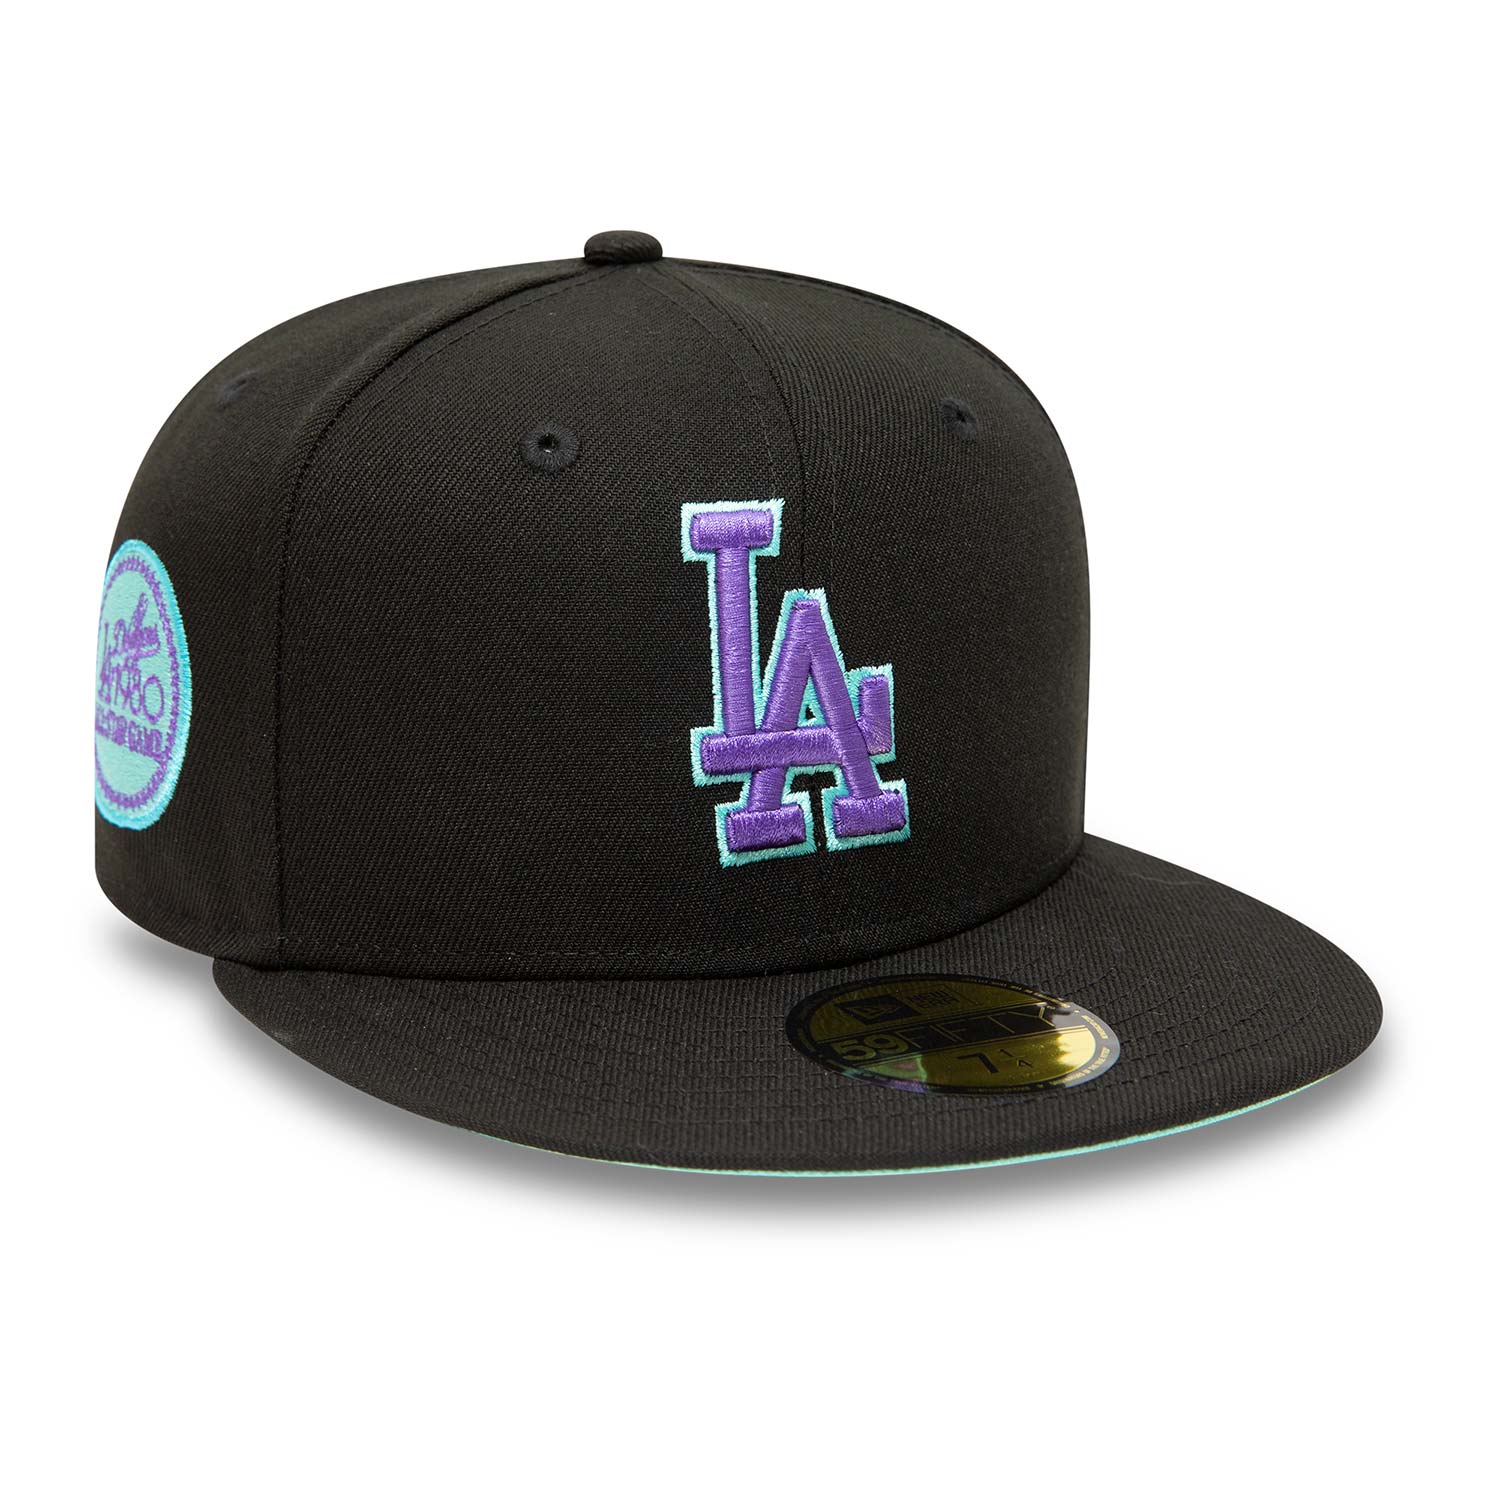 LA Dodgers Black and Blue Tint 59FIFTY Fitted Cap 59FIFTY